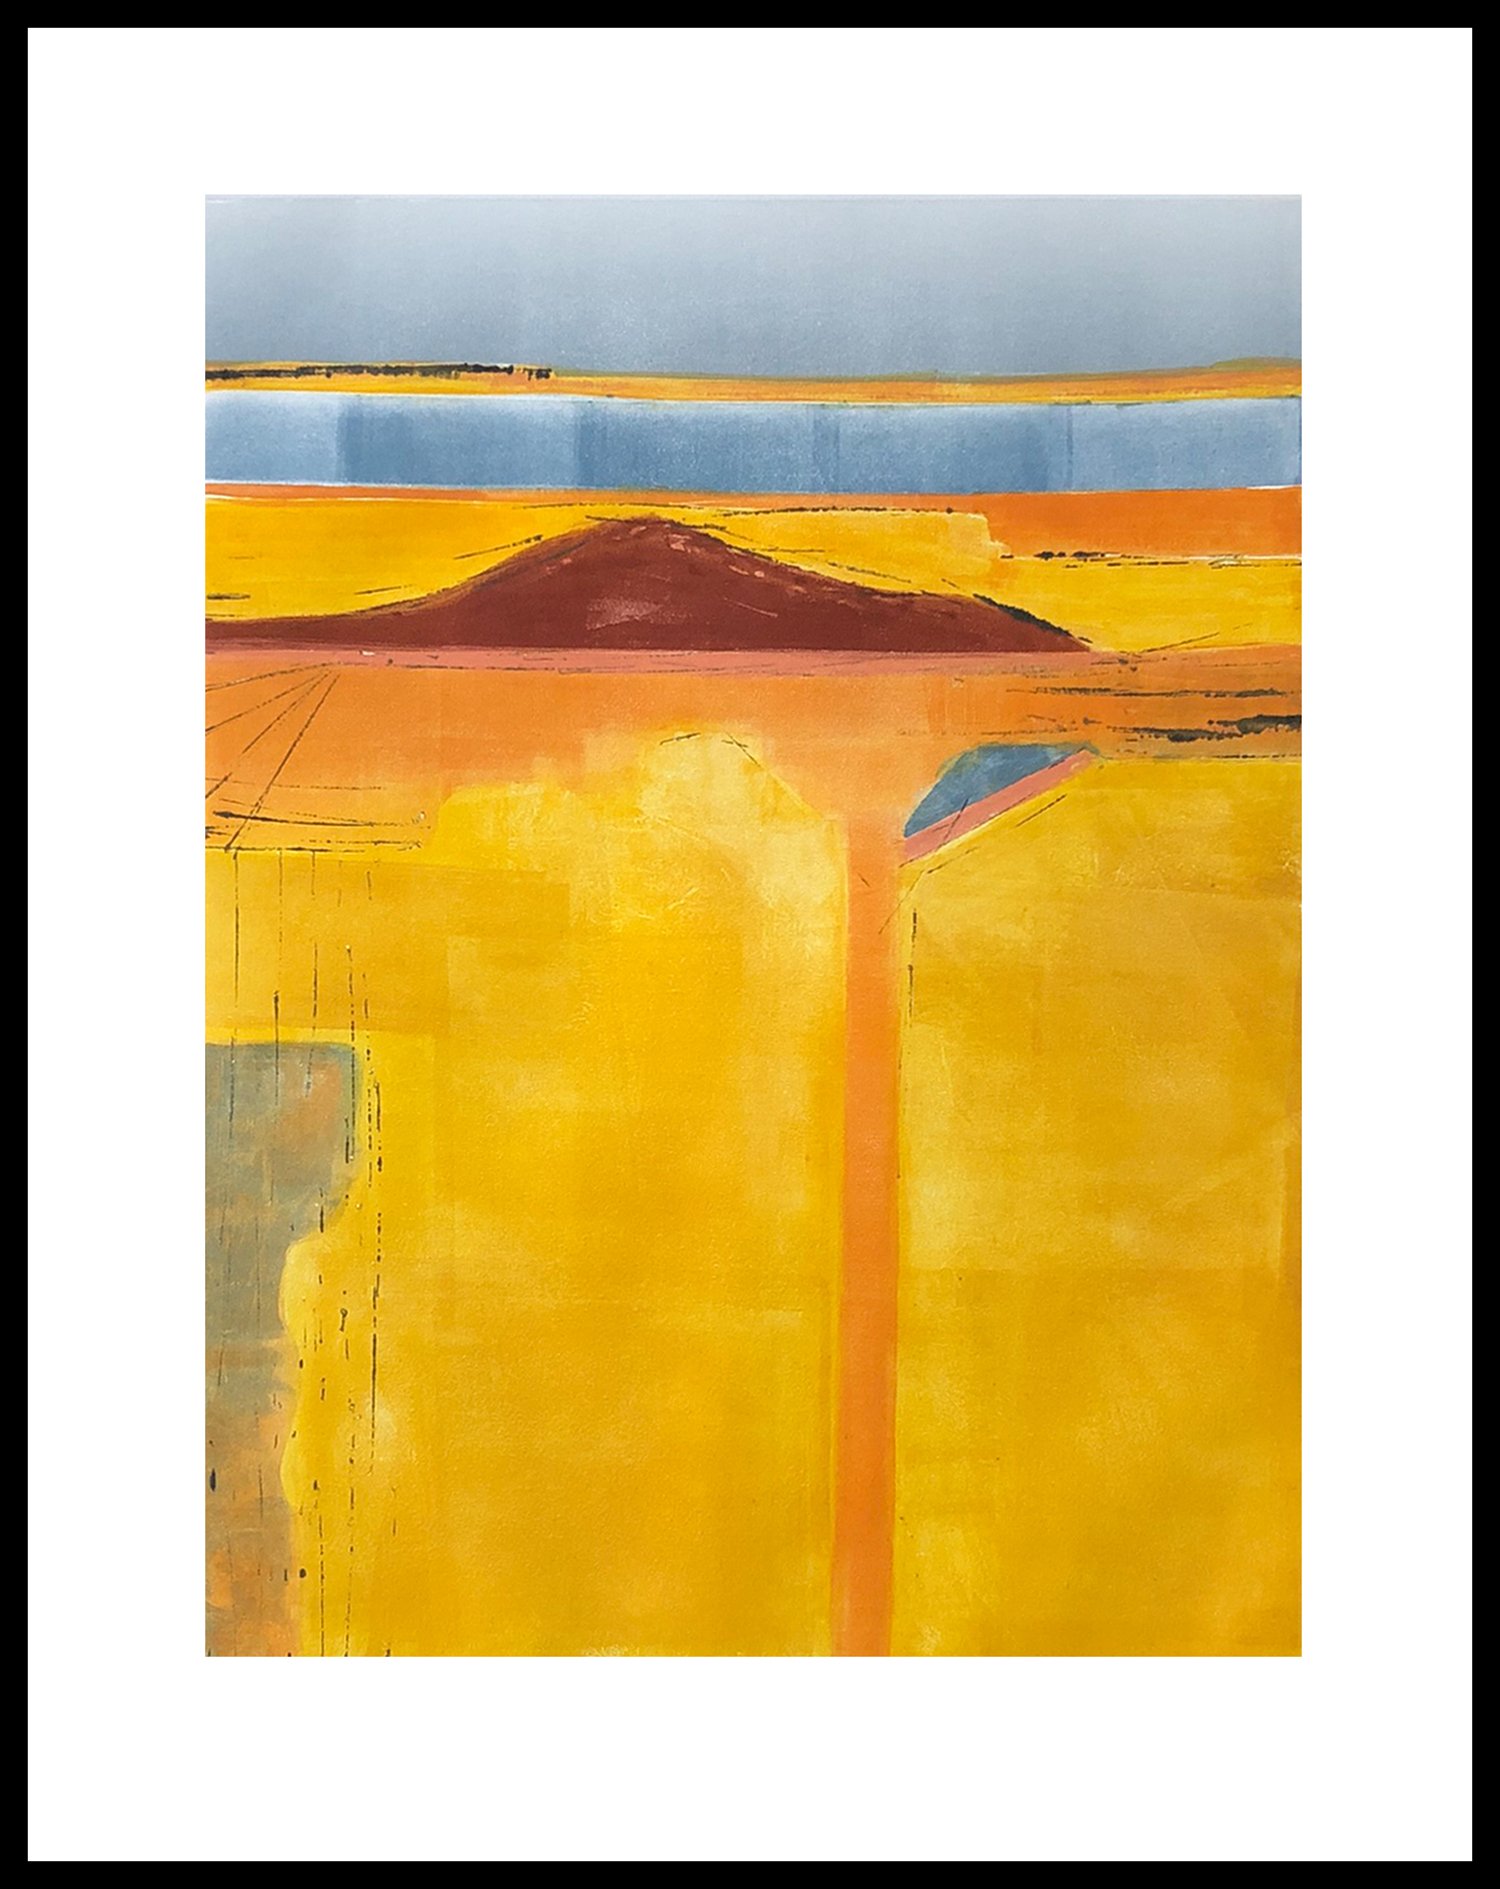    “Sacred Land”    There is only one planet, we must think of it as sacred. 1/1  Monotype, Ready for you to hang, framed/matted 35 x 28”   $890 - sold  